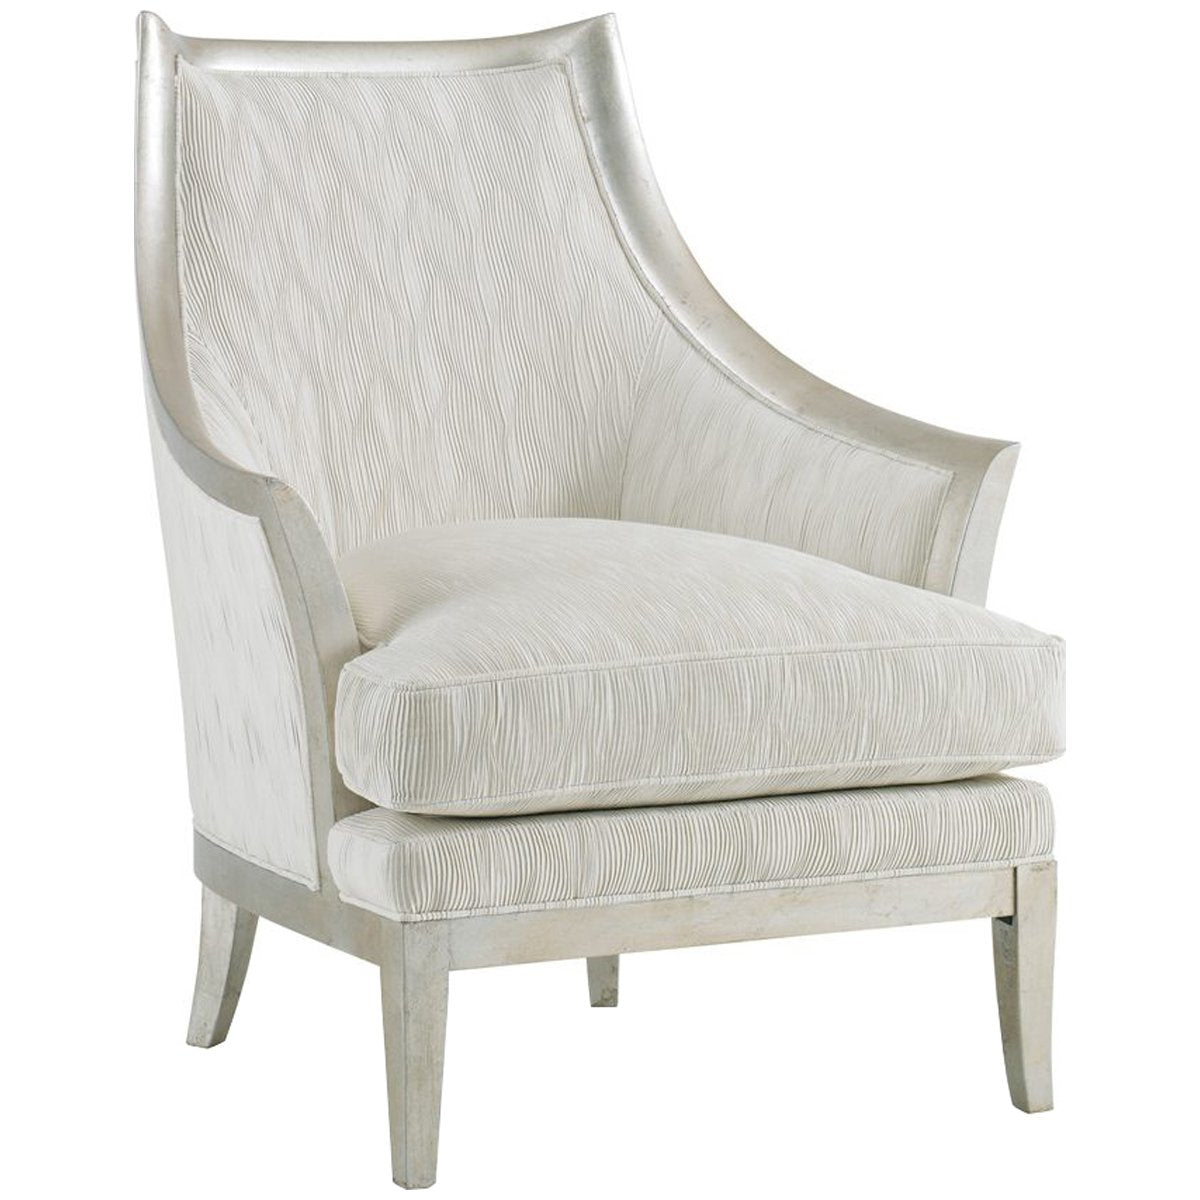 Hickory White Platinum Leaf Exposed Wood Chair